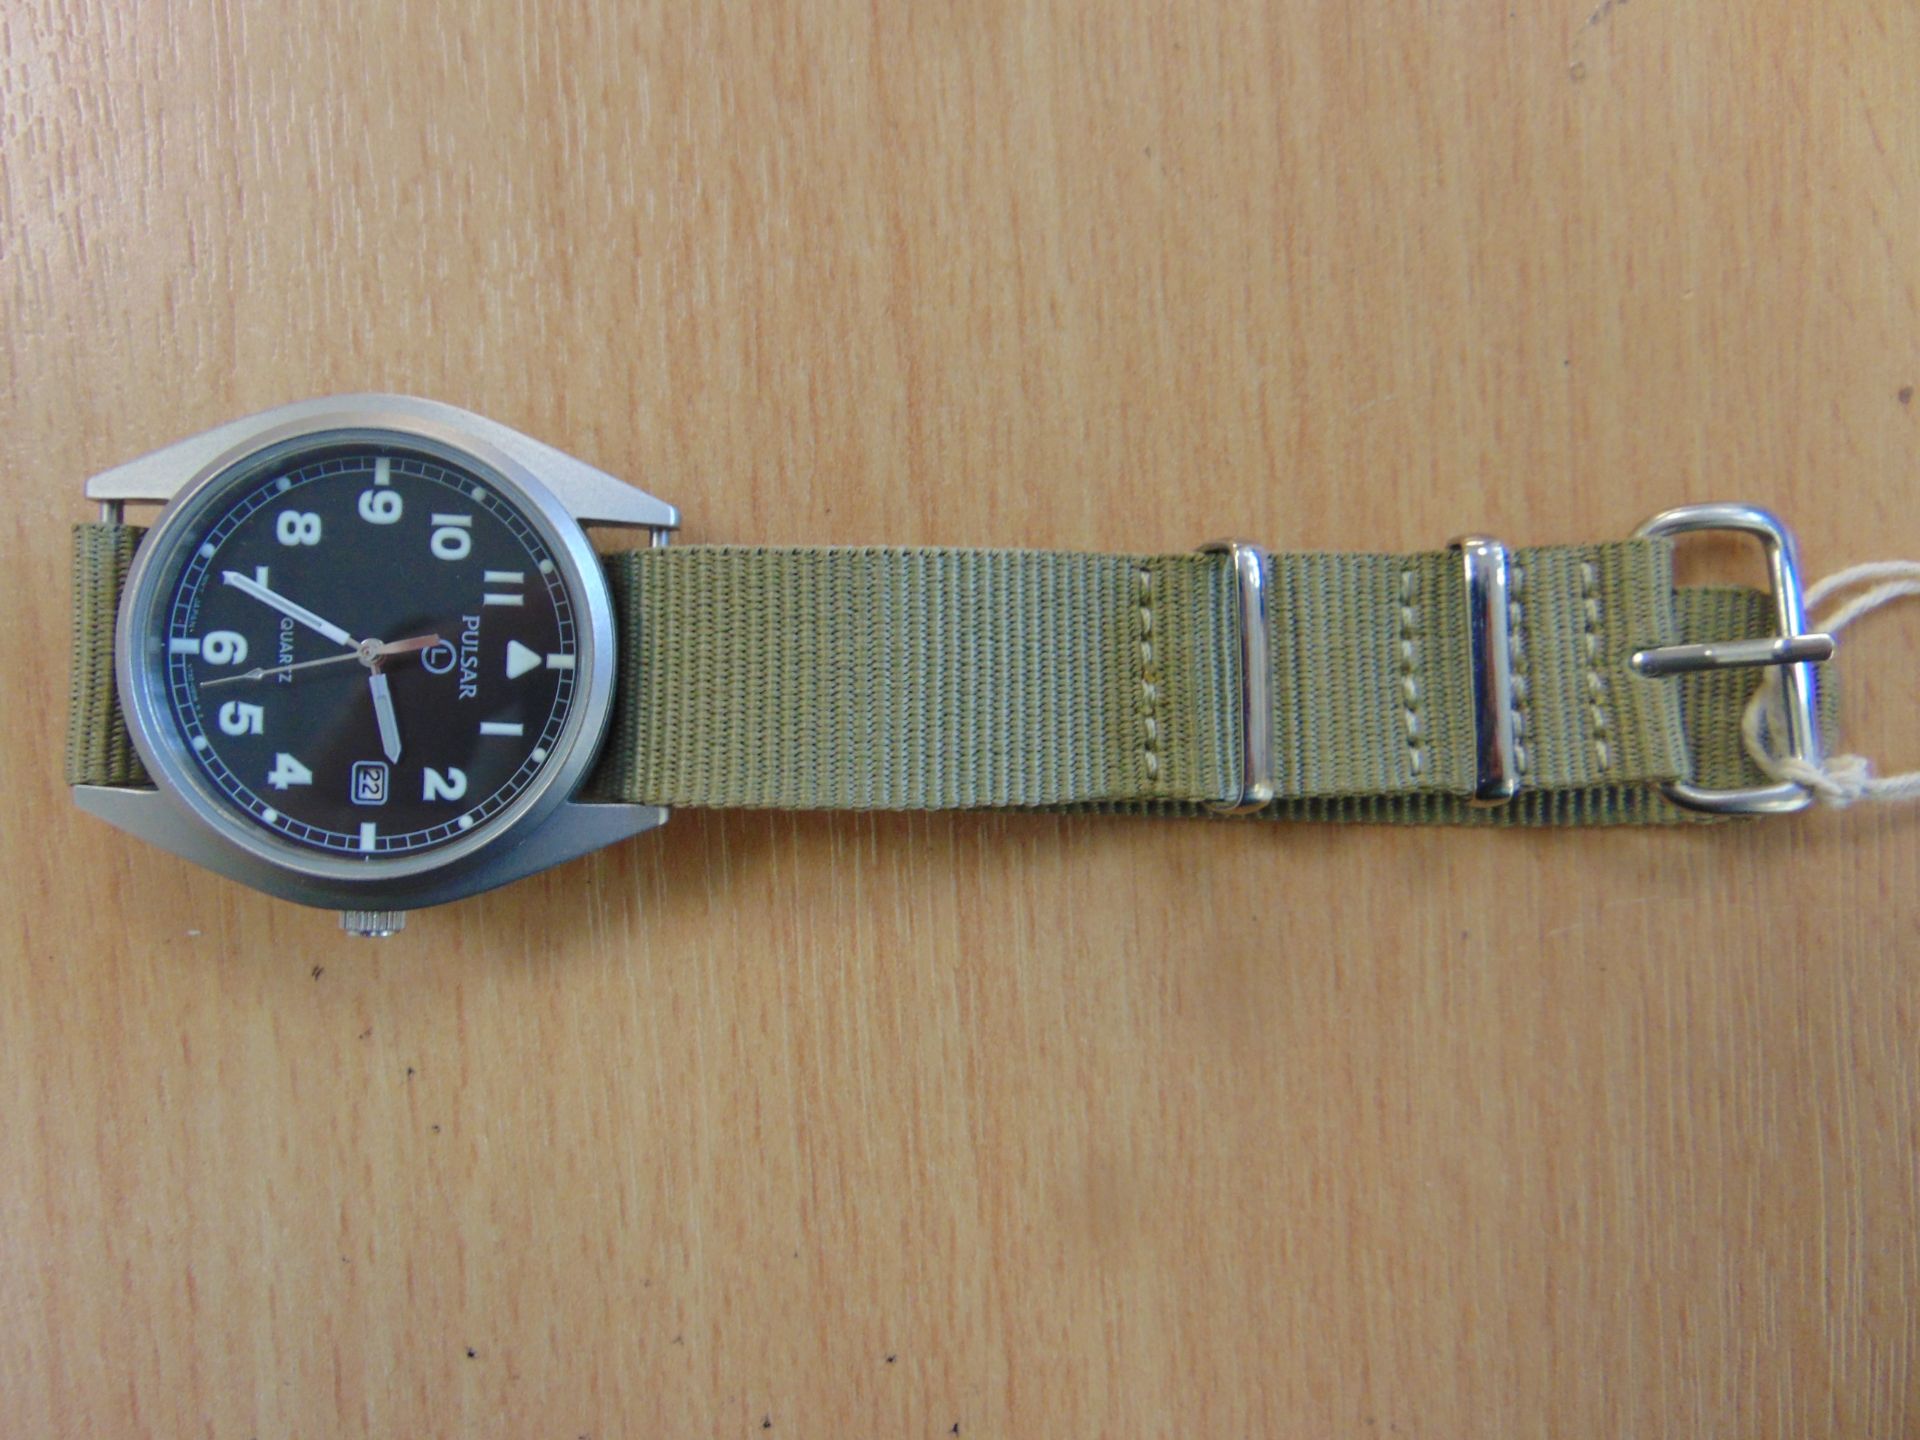 UNISSUED PULSAR W10 SERVICE WATCH NATO MARKED DATED 1999 ORIGINAL STRAP AND NEW BATTERY - Image 4 of 12